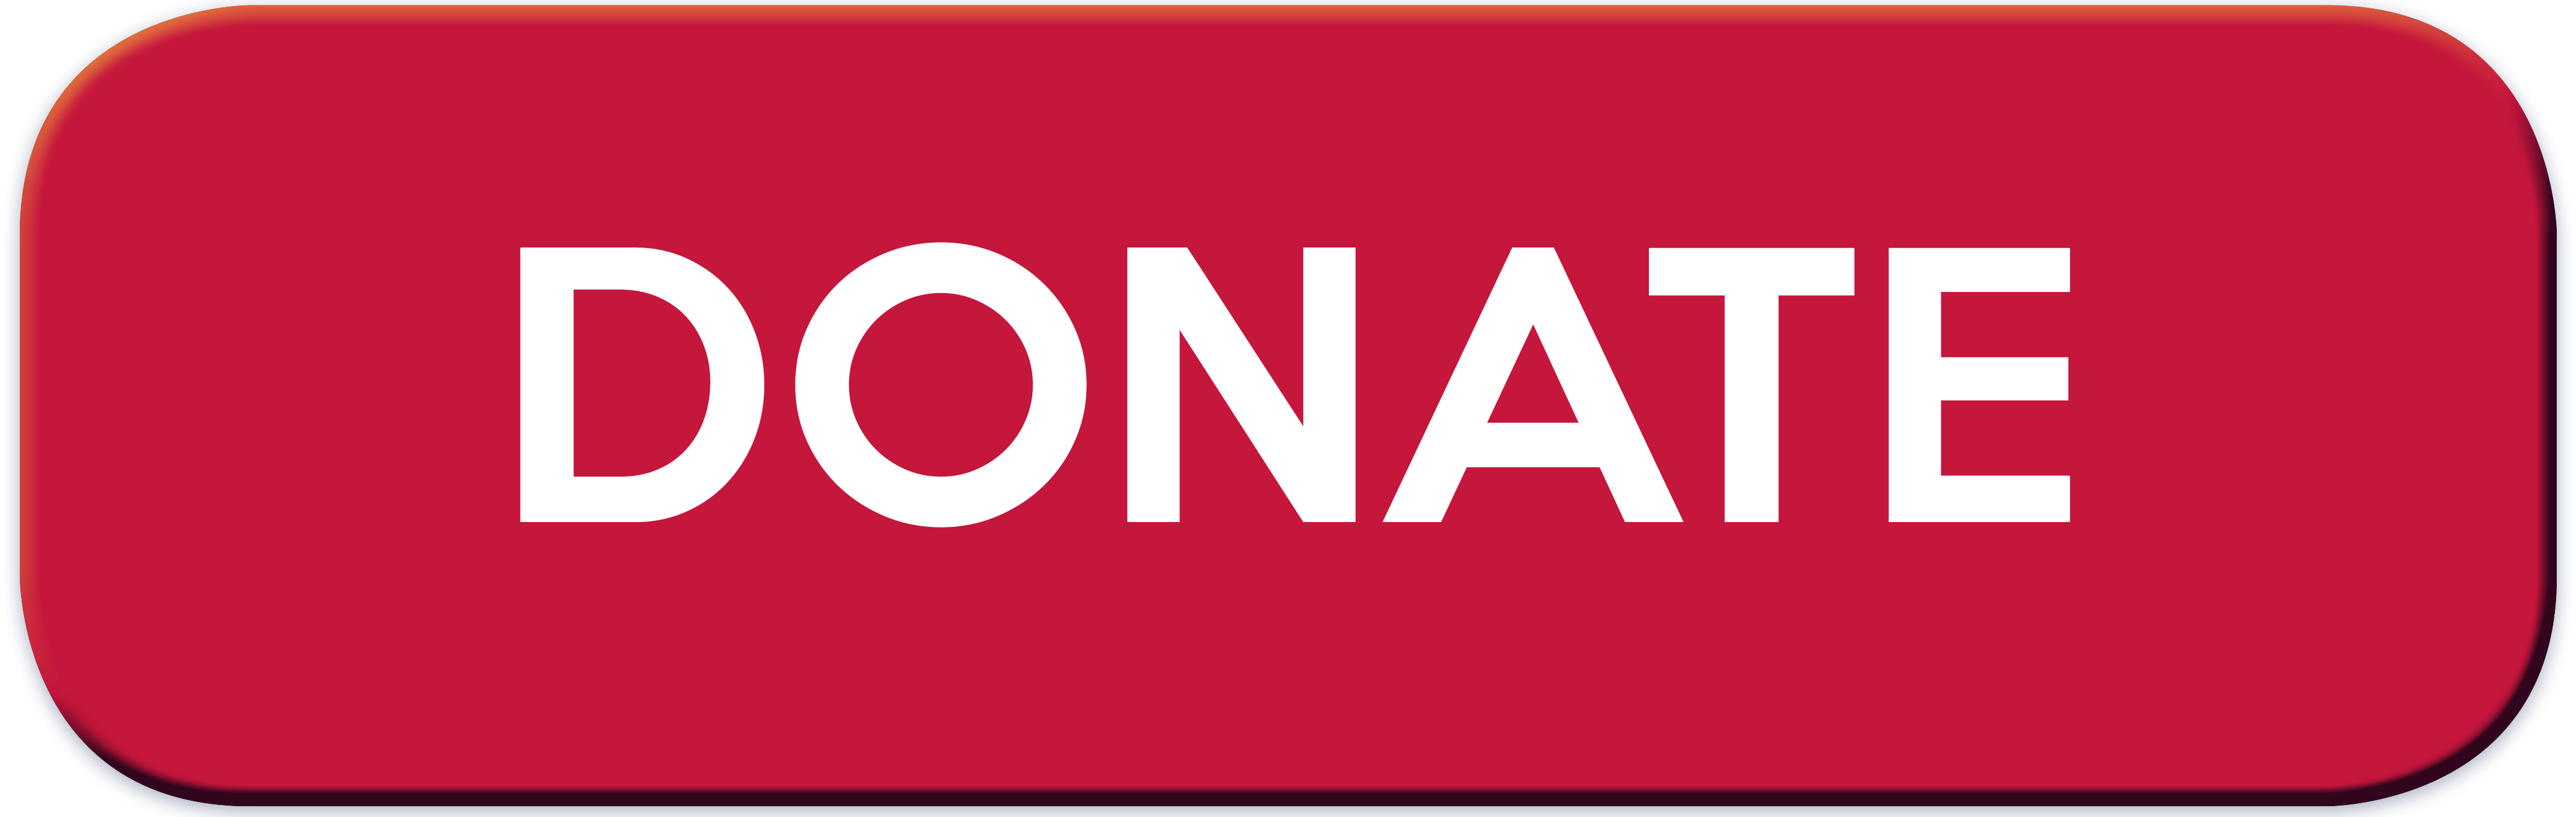 Donation Button Images - The Image of Collection